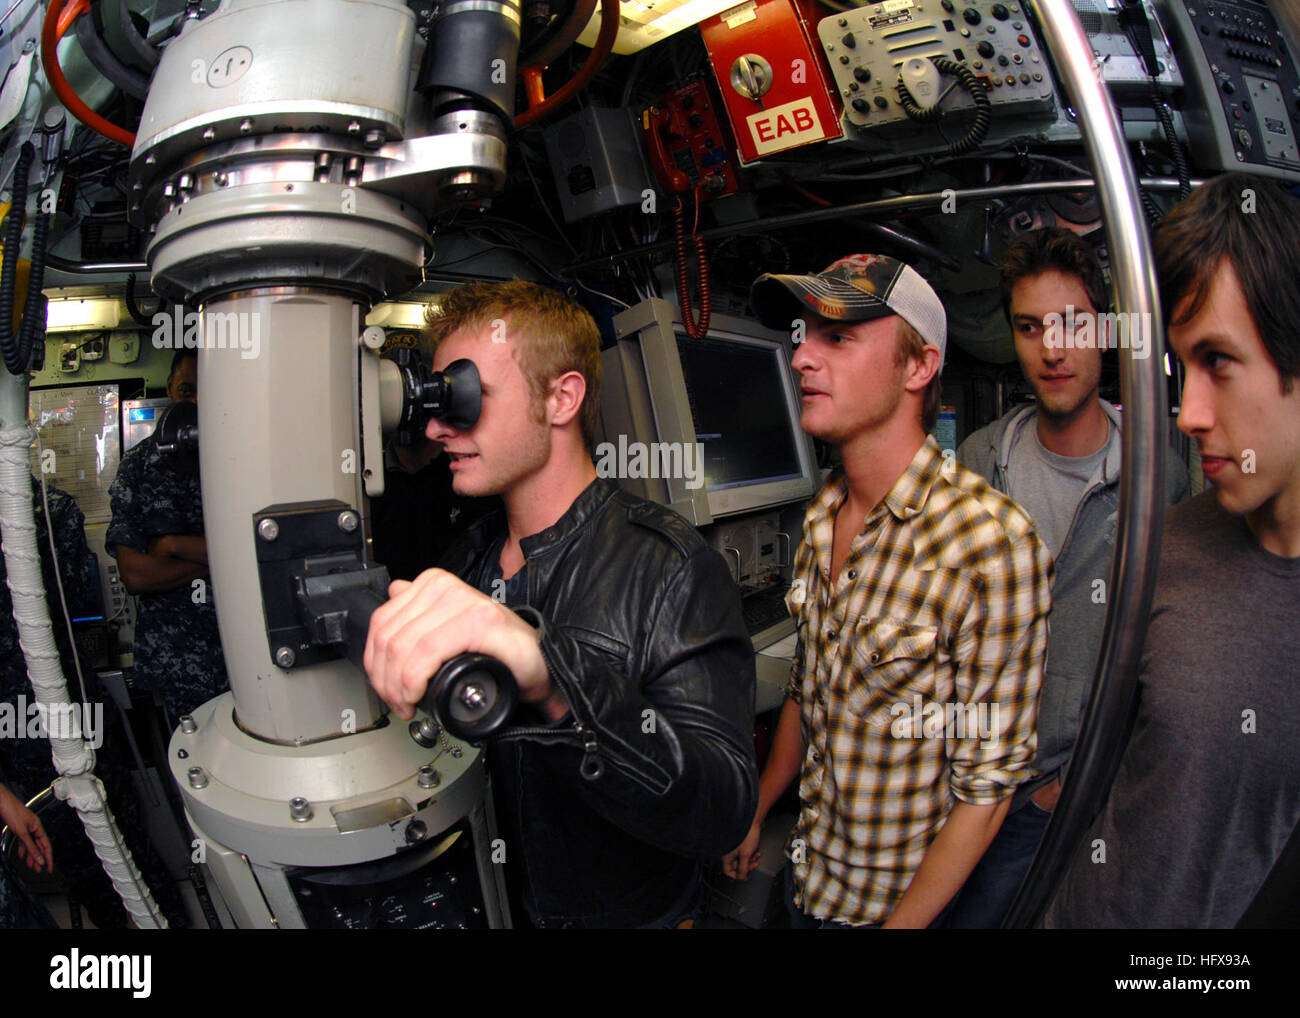 090511-N-7705S-031 NORFOLK (May 11, 2009) Josh Carter of the country music band The Carter Twins peers through the periscope of the Los Angeles-class attack submarine USS Norfolk (SSN 714) as his twin brother Josh looks on. The Carter Twins, currently on tour, were named the fastest rising new country act of 2009 by Country Music Television. The country music stars, their family, and band members made a brief stop at Naval Station Norfolk to visit the submarine before continuing on with their concert tour. (U.S. Navy photo by Mass Communication Specialist 1st Class Todd A. Schaffer/Released) U Stock Photo